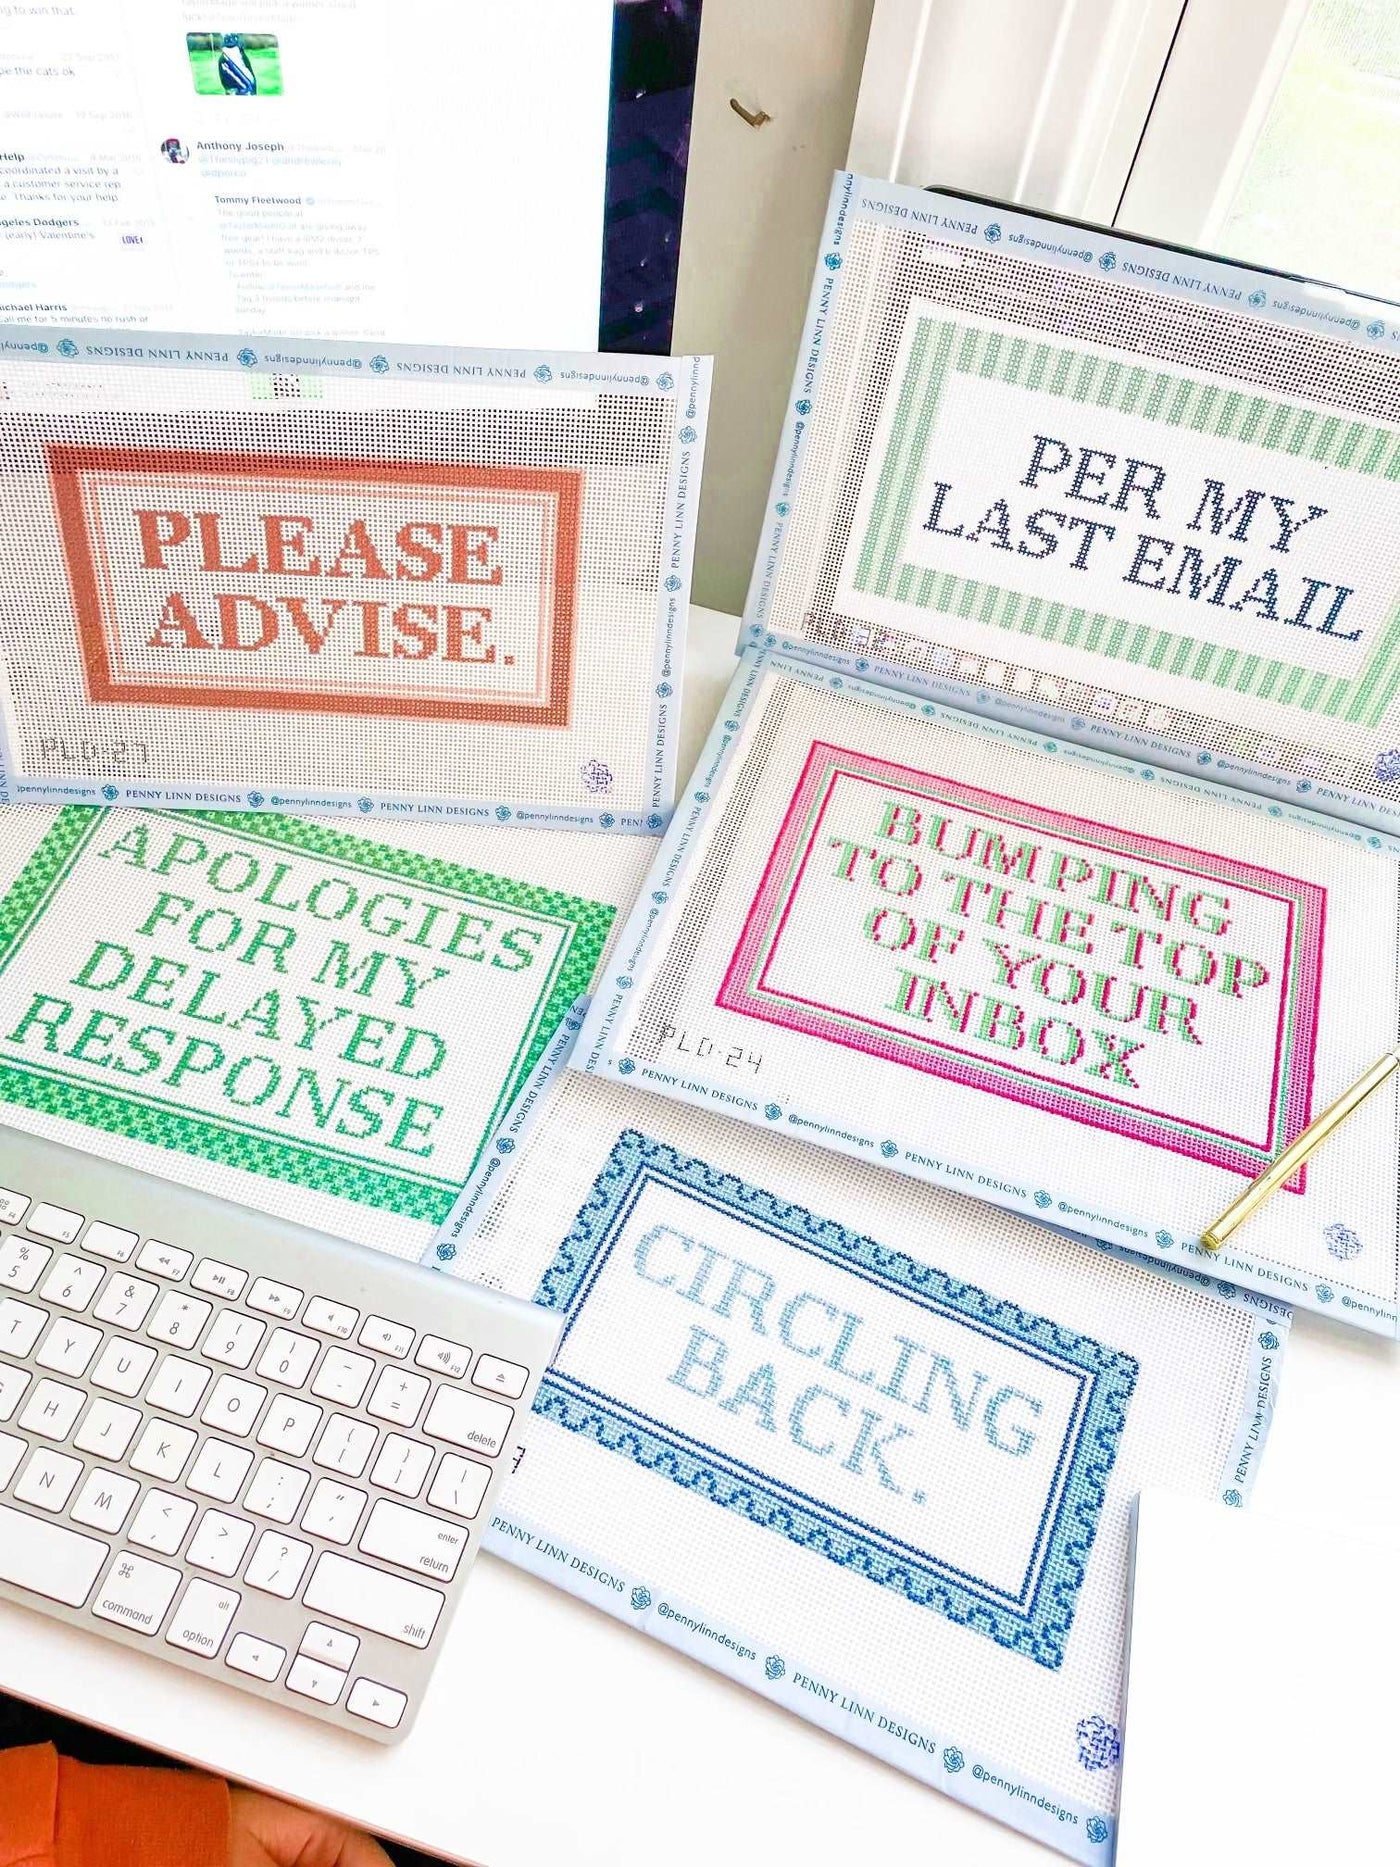 Bumping to the Top of Your Inbox - Penny Linn Designs - Penny Linn Designs